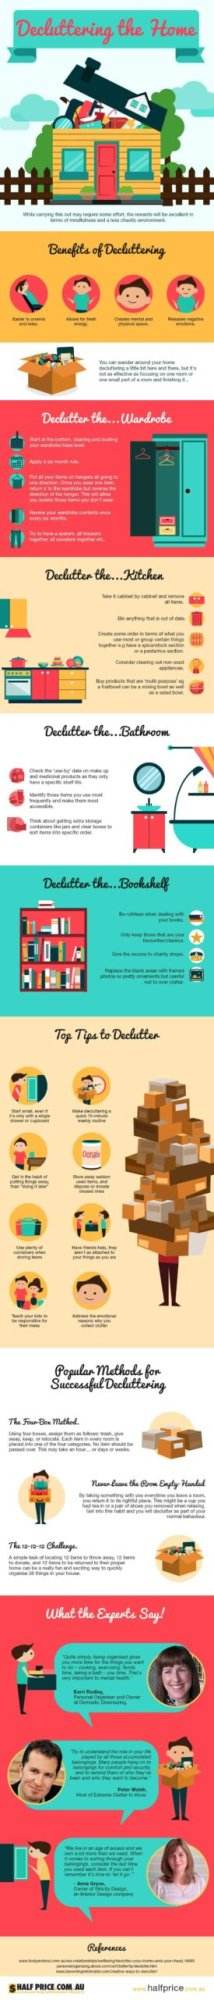 28 Awesome Tips on How To Declutter your Home (Infographic) questions to ask when viewing